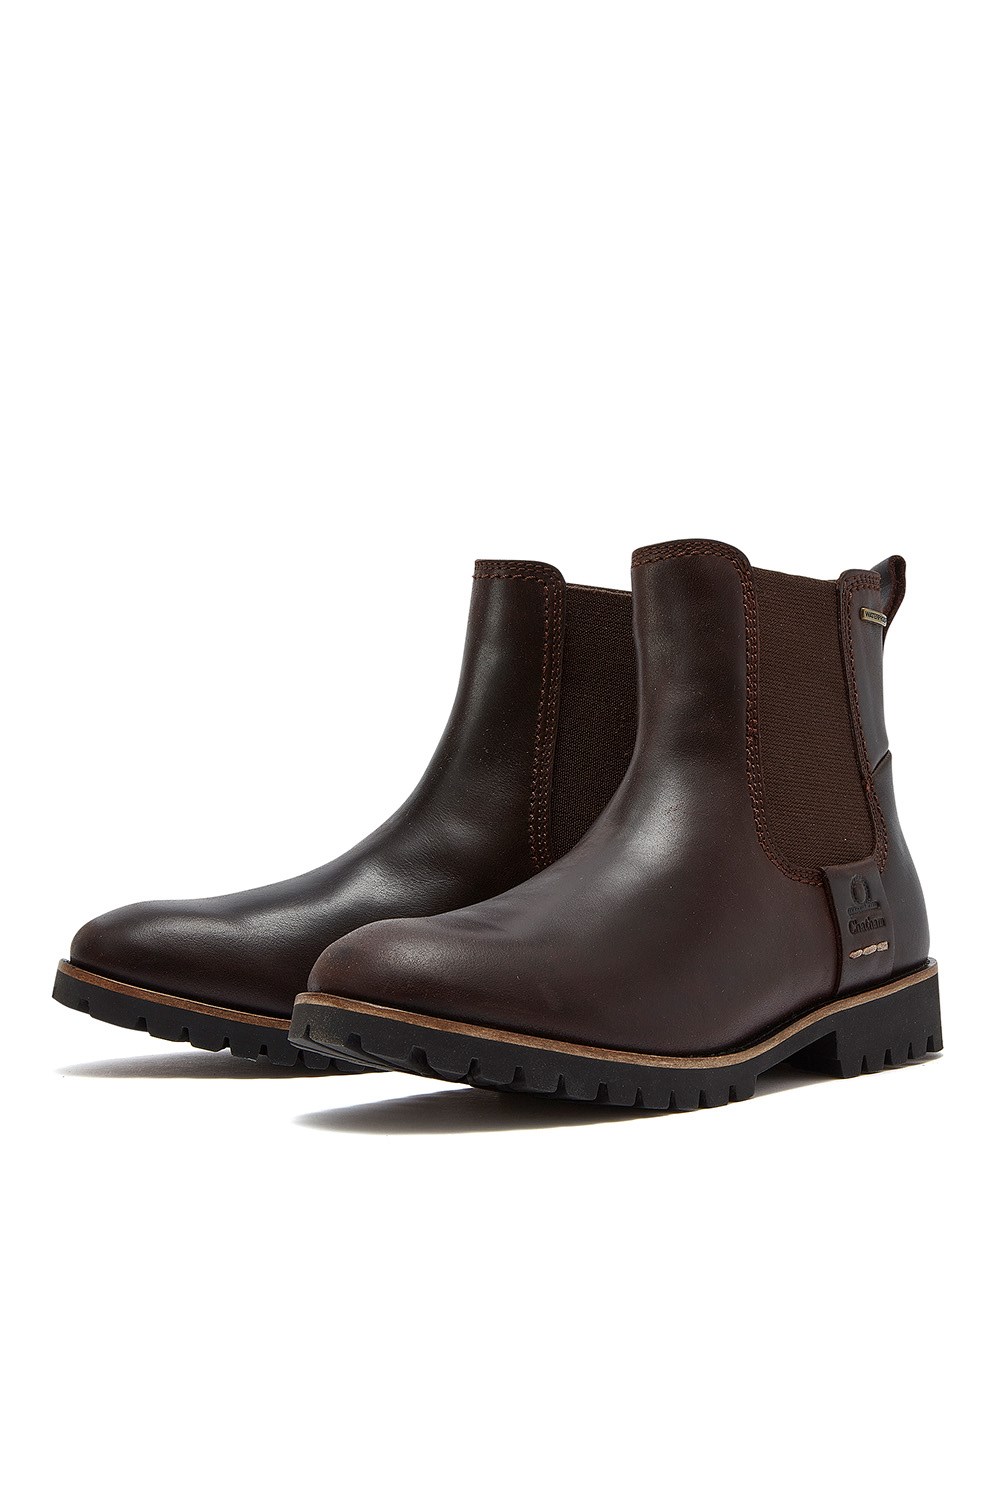 Olympia Premium Leather Waterproof Chelsea Boots -